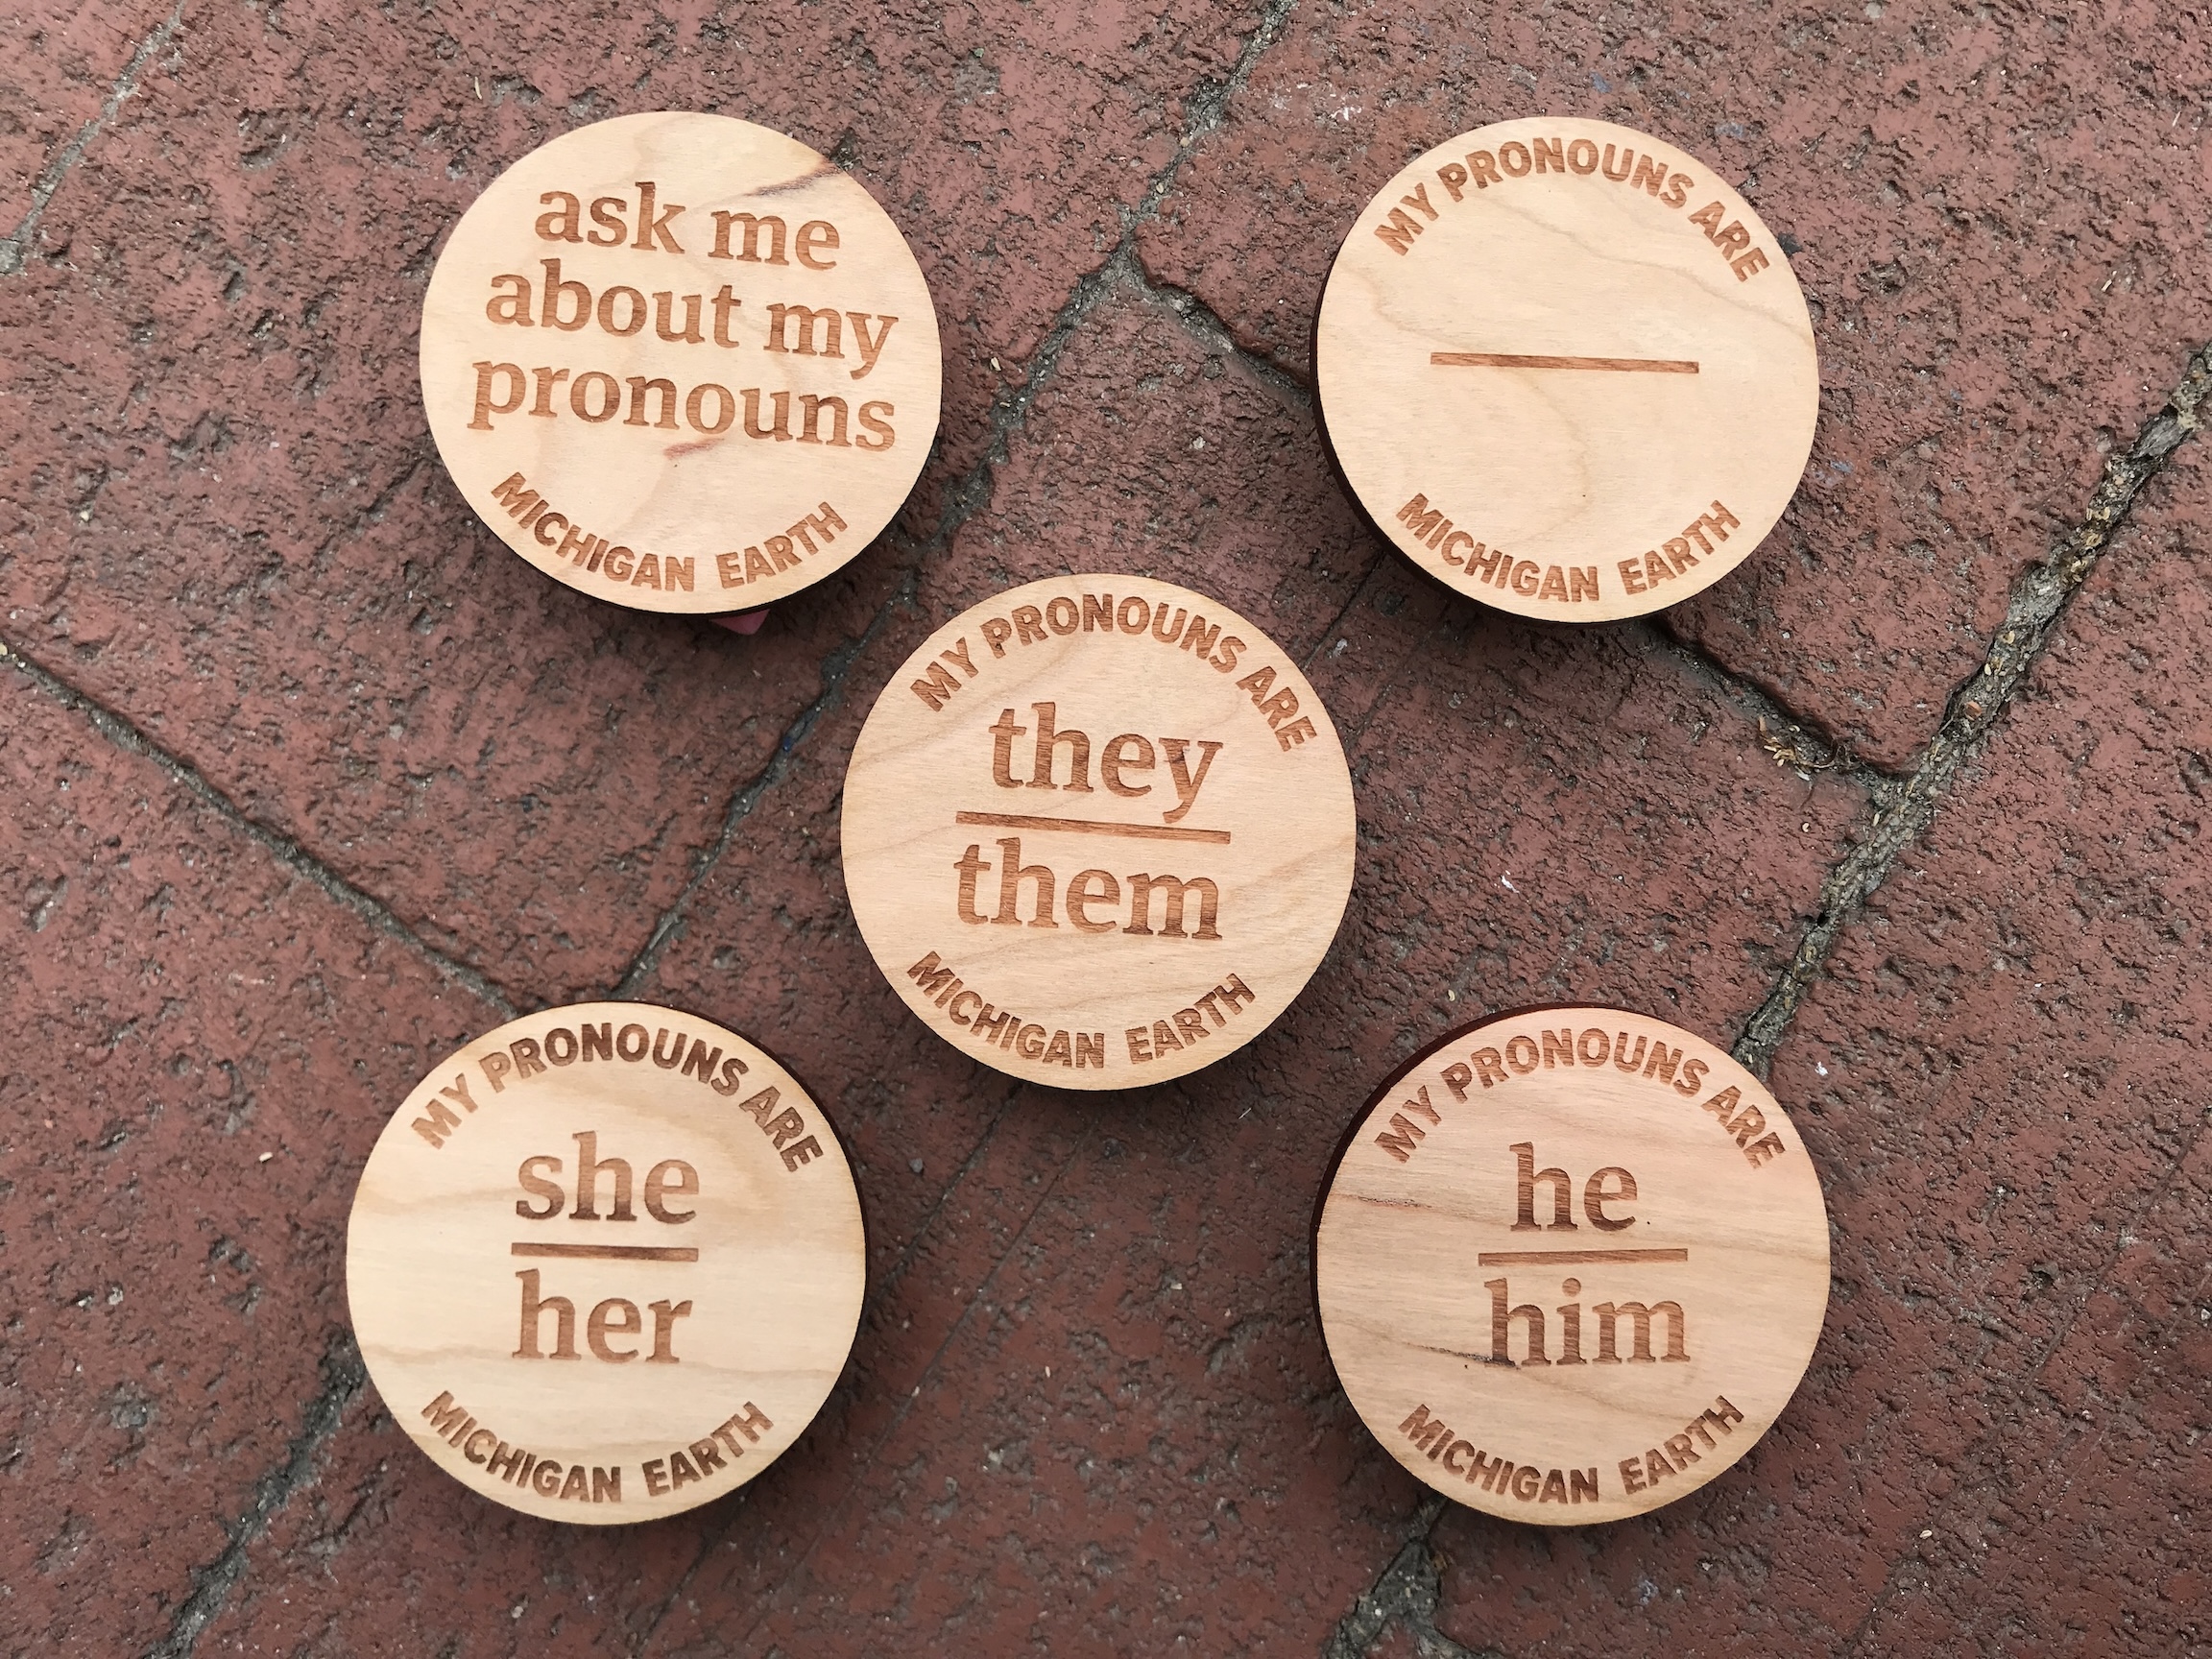 Pronoun pins staying ask me about my pronouns, blank, they/them, she/her, he/his 